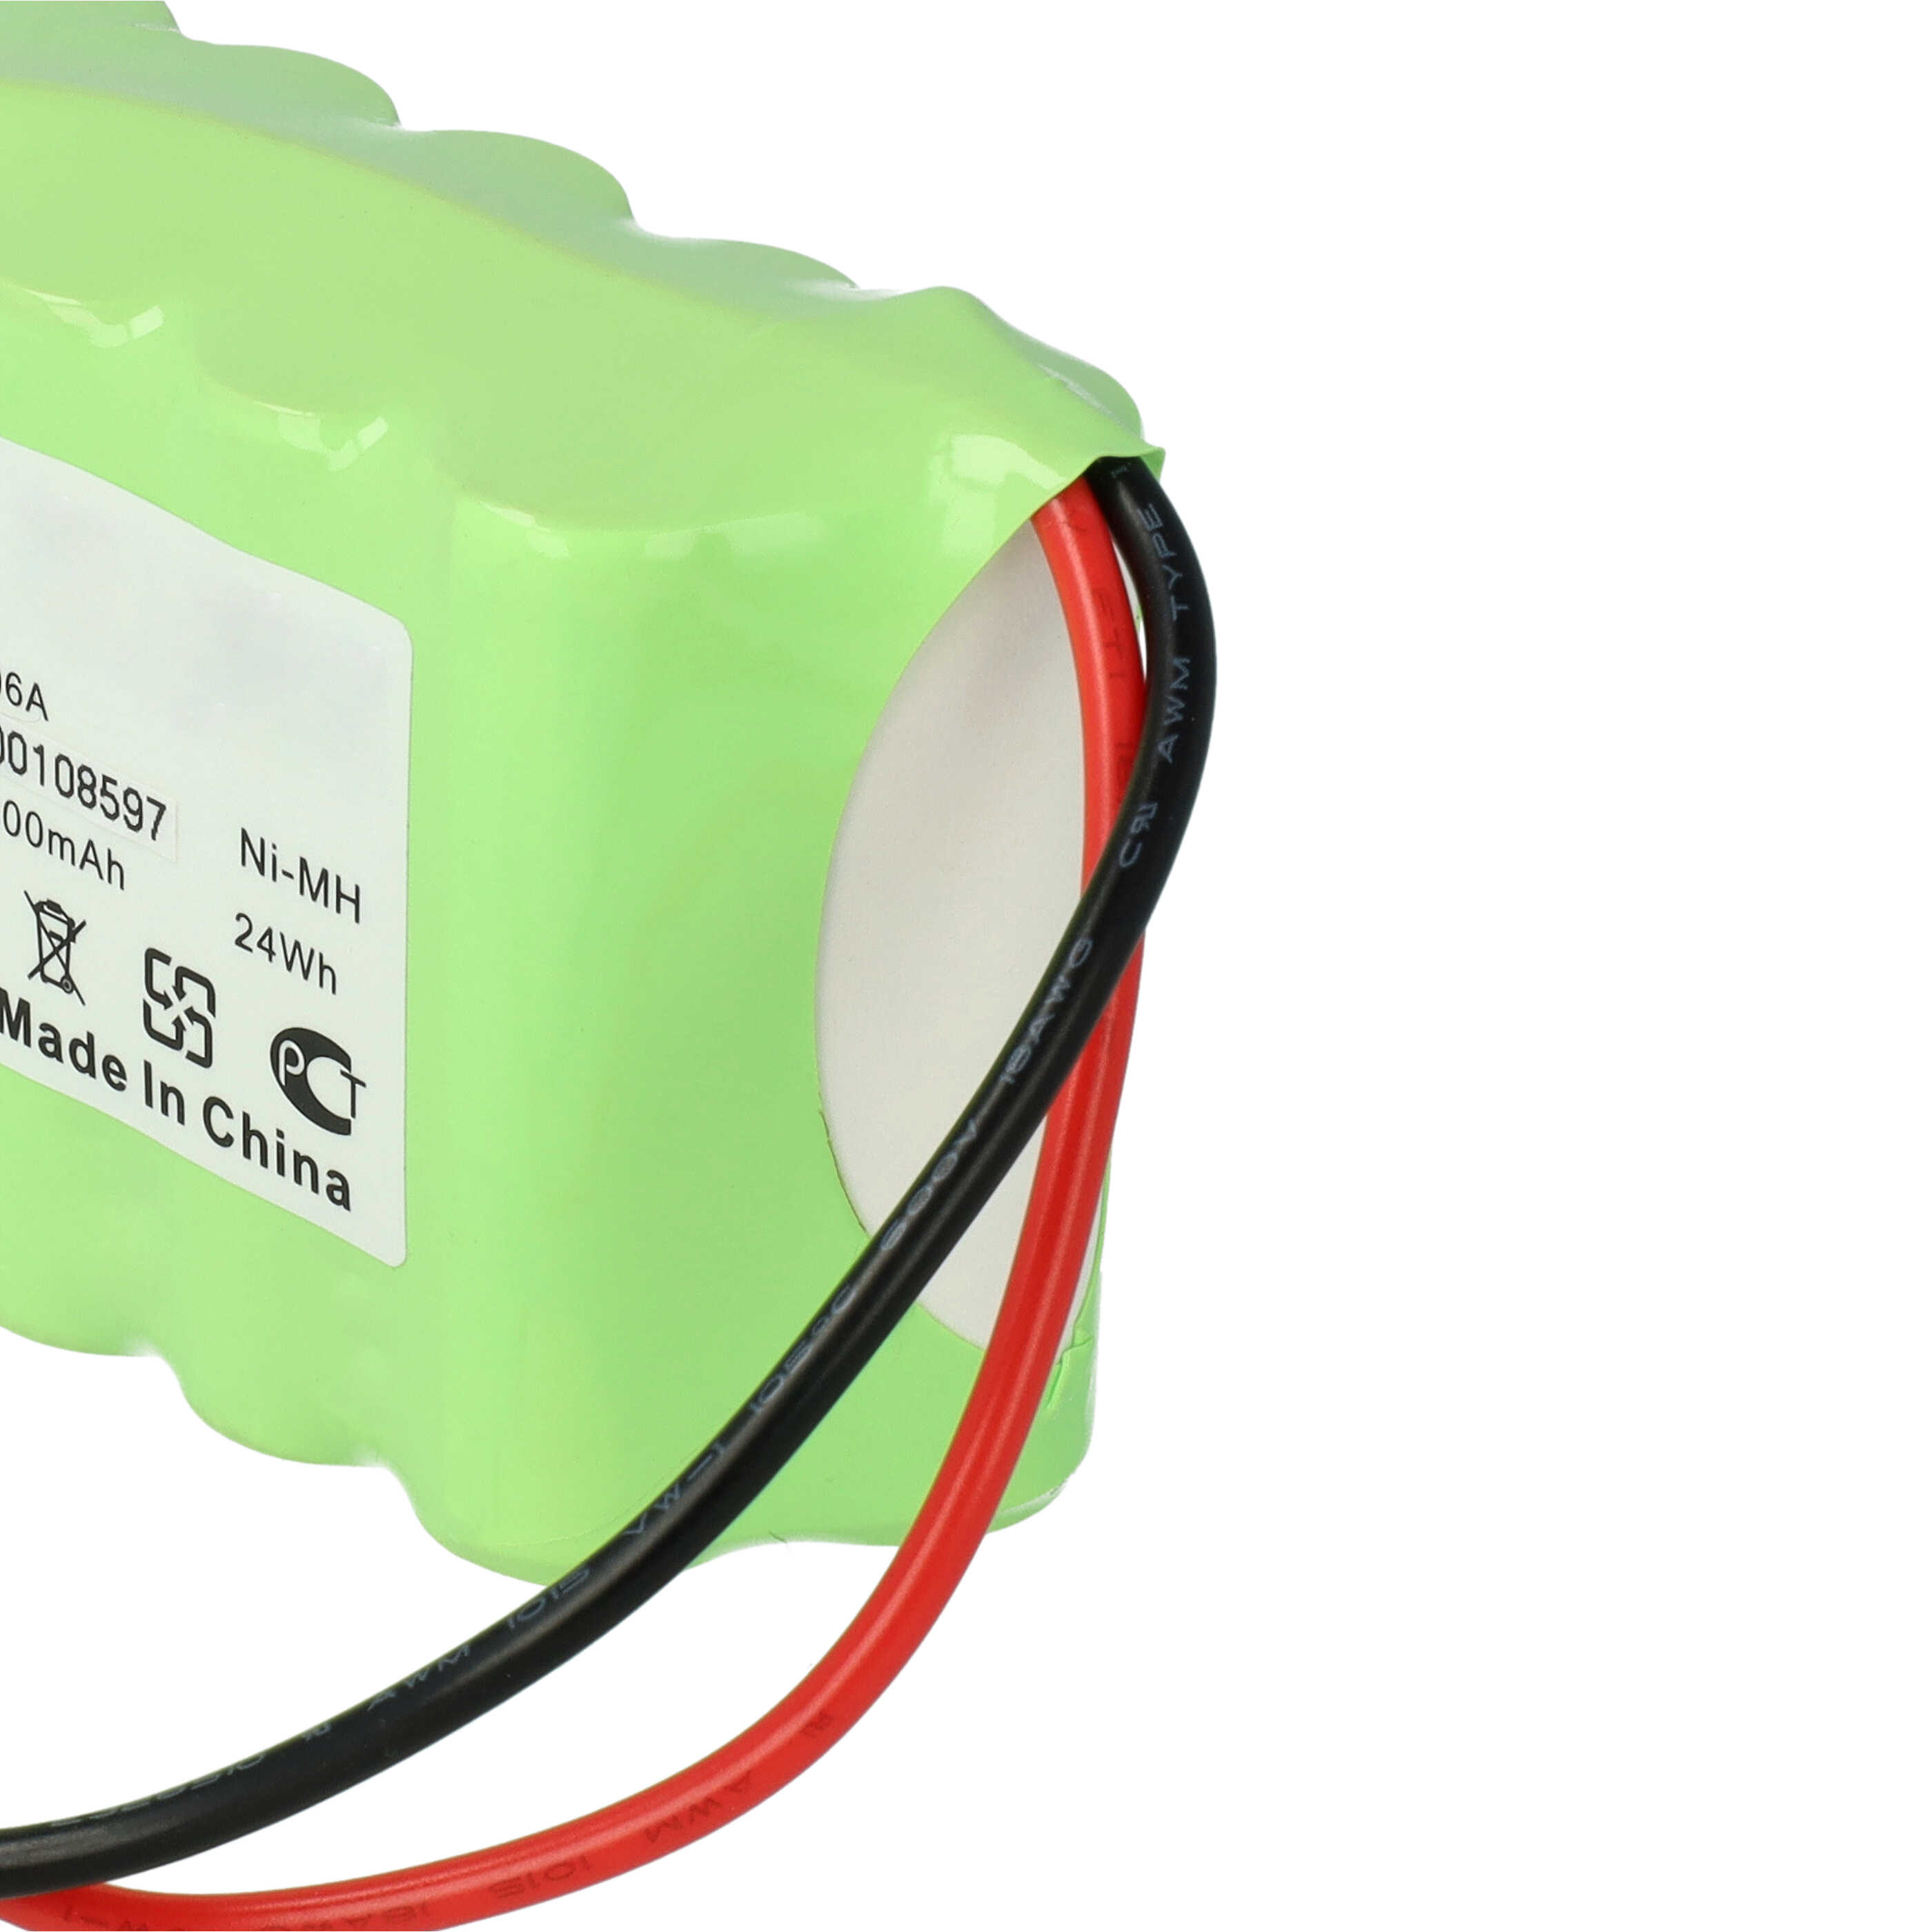 Lawnmower Battery Replacement for MRK5006A - 2000mAh 12V NiMH